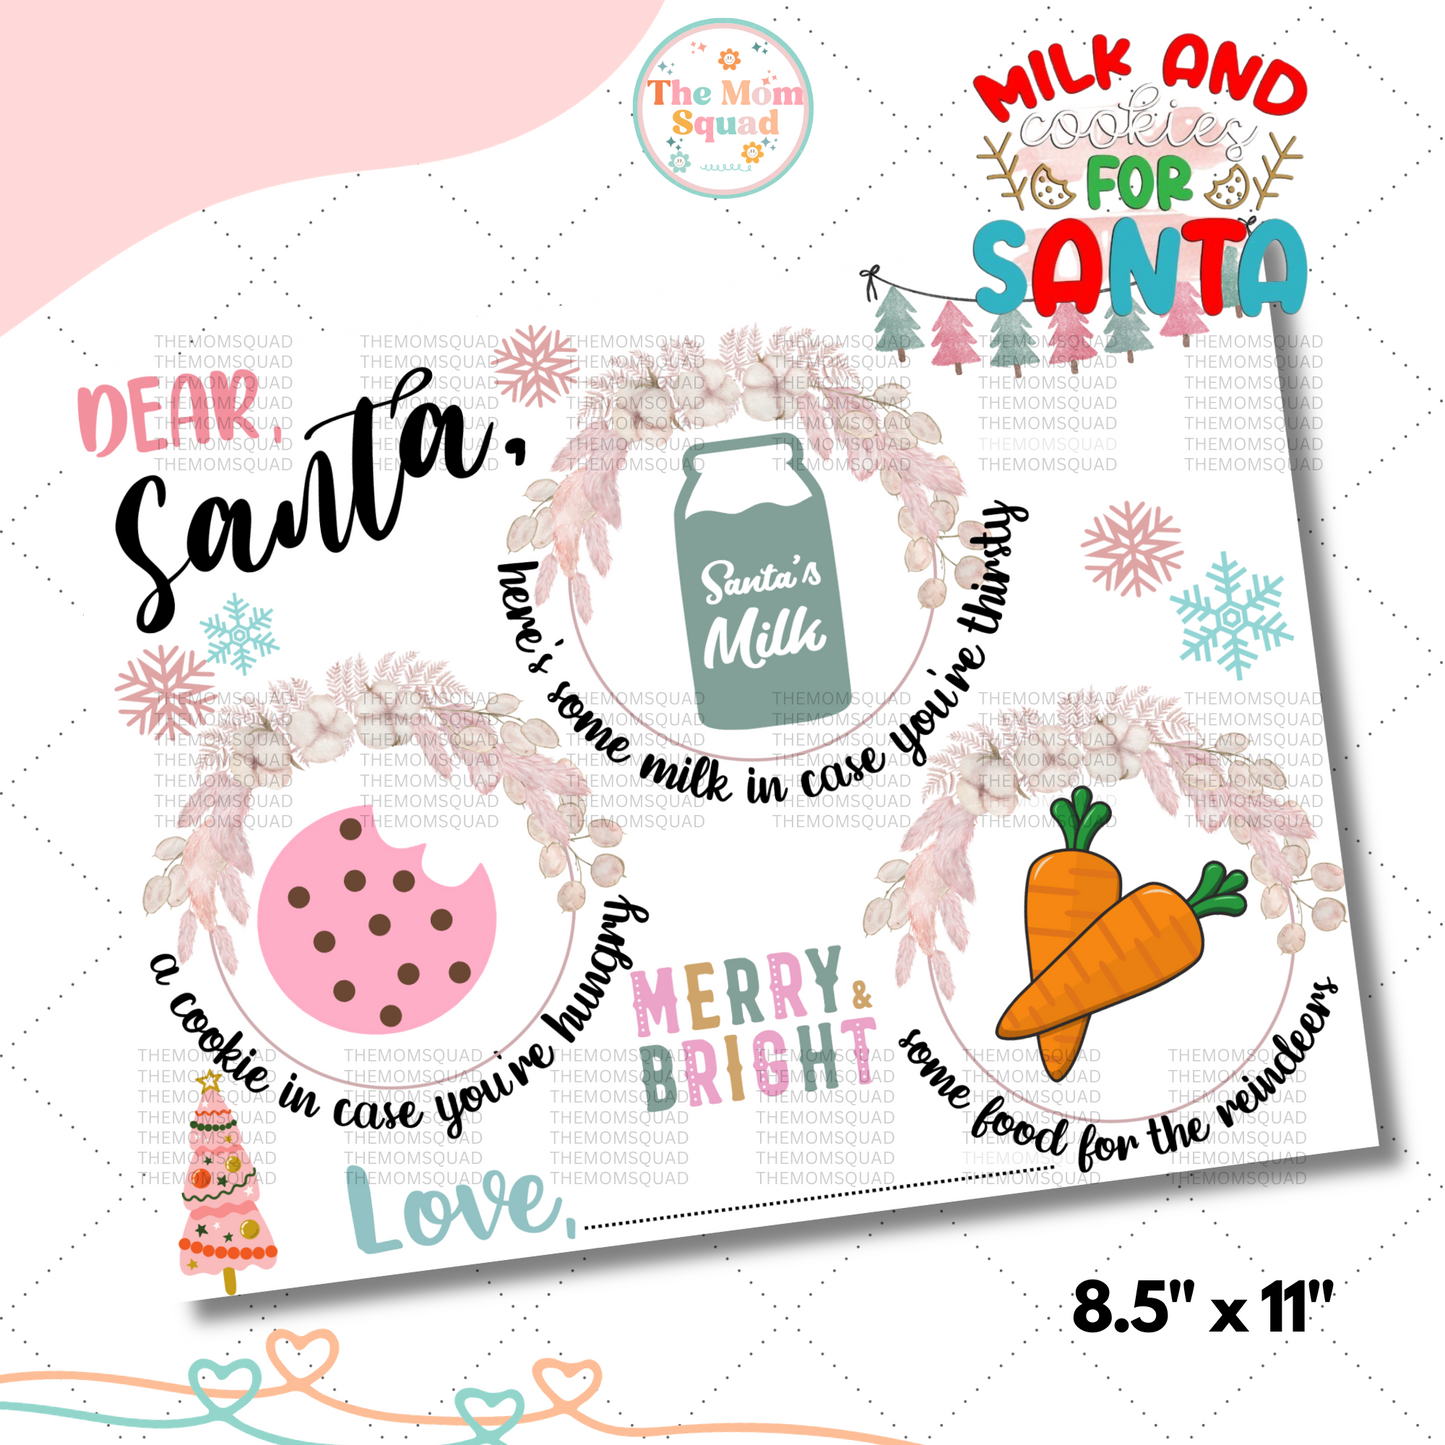 Dear Santa Cookie Tray Placemat Printable (8.5" x 11") – Festive Design for Reindeer Treats, Santa Cookies, and Milk Delight! Create Enchanting Holiday Memories.